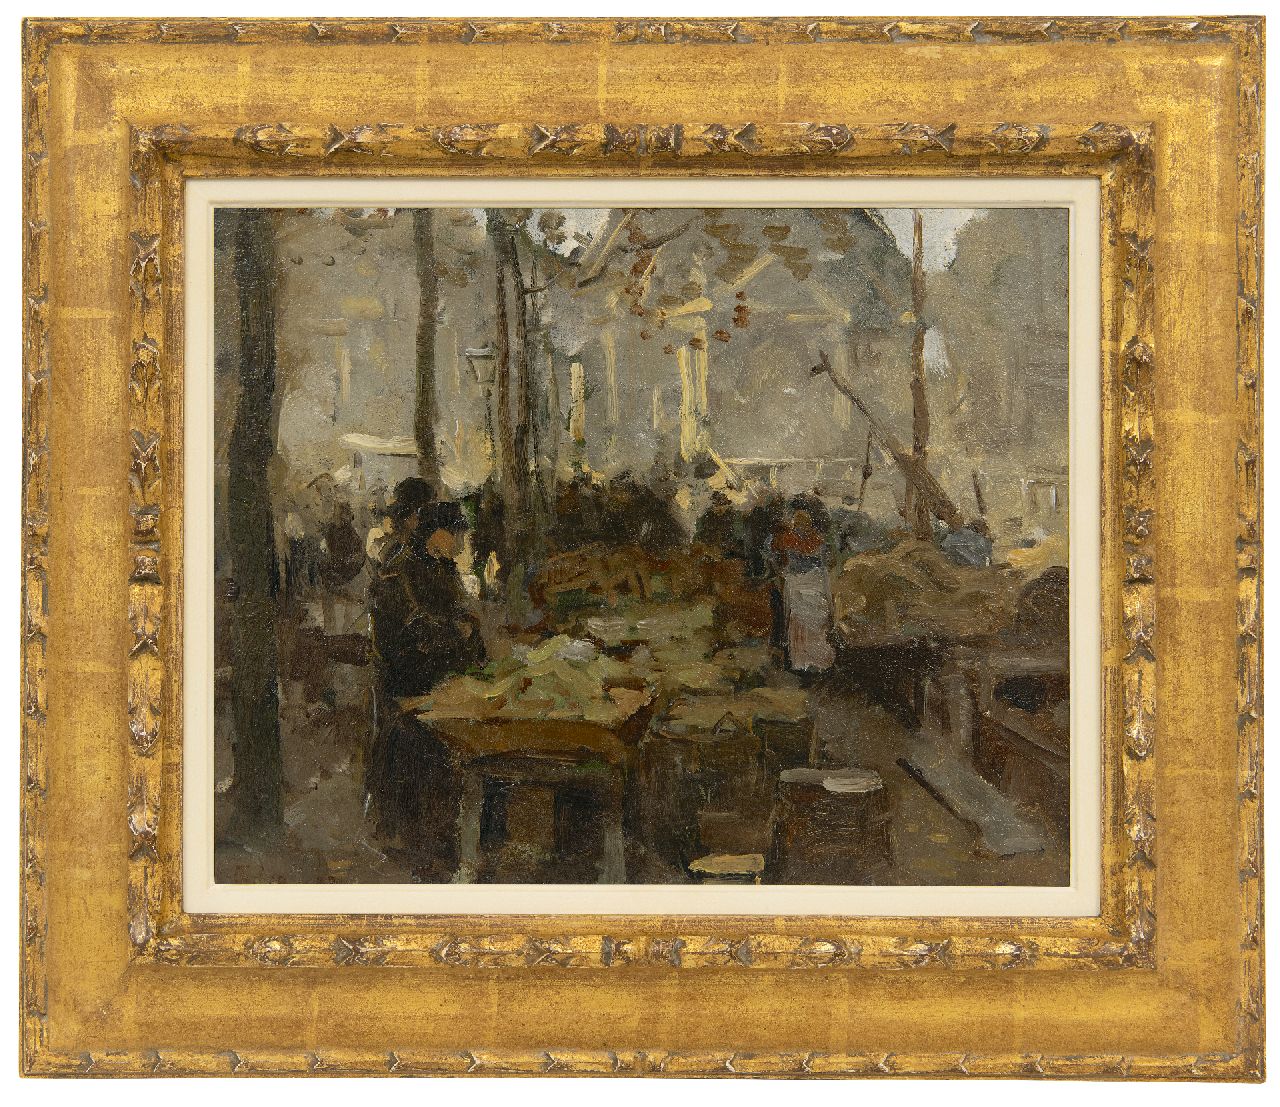 Tholen W.B.  | Willem Bastiaan Tholen, Market on the quay, oil on panel 29.1 x 35.9 cm, signed l.l. and dated '83